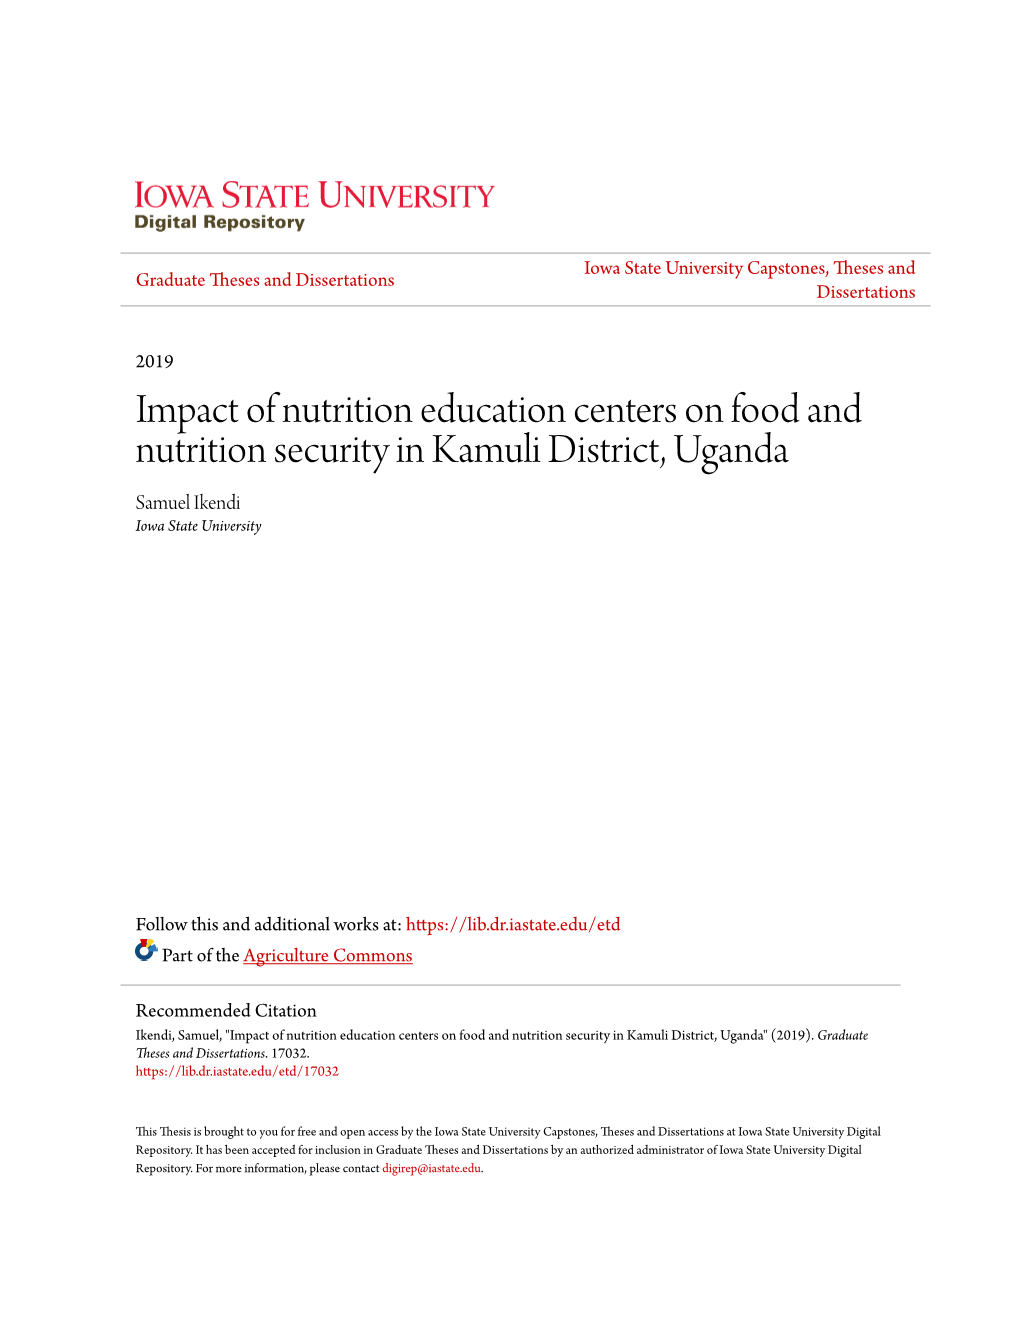 Impact of Nutrition Education Centers on Food and Nutrition Security in Kamuli District, Uganda Samuel Ikendi Iowa State University